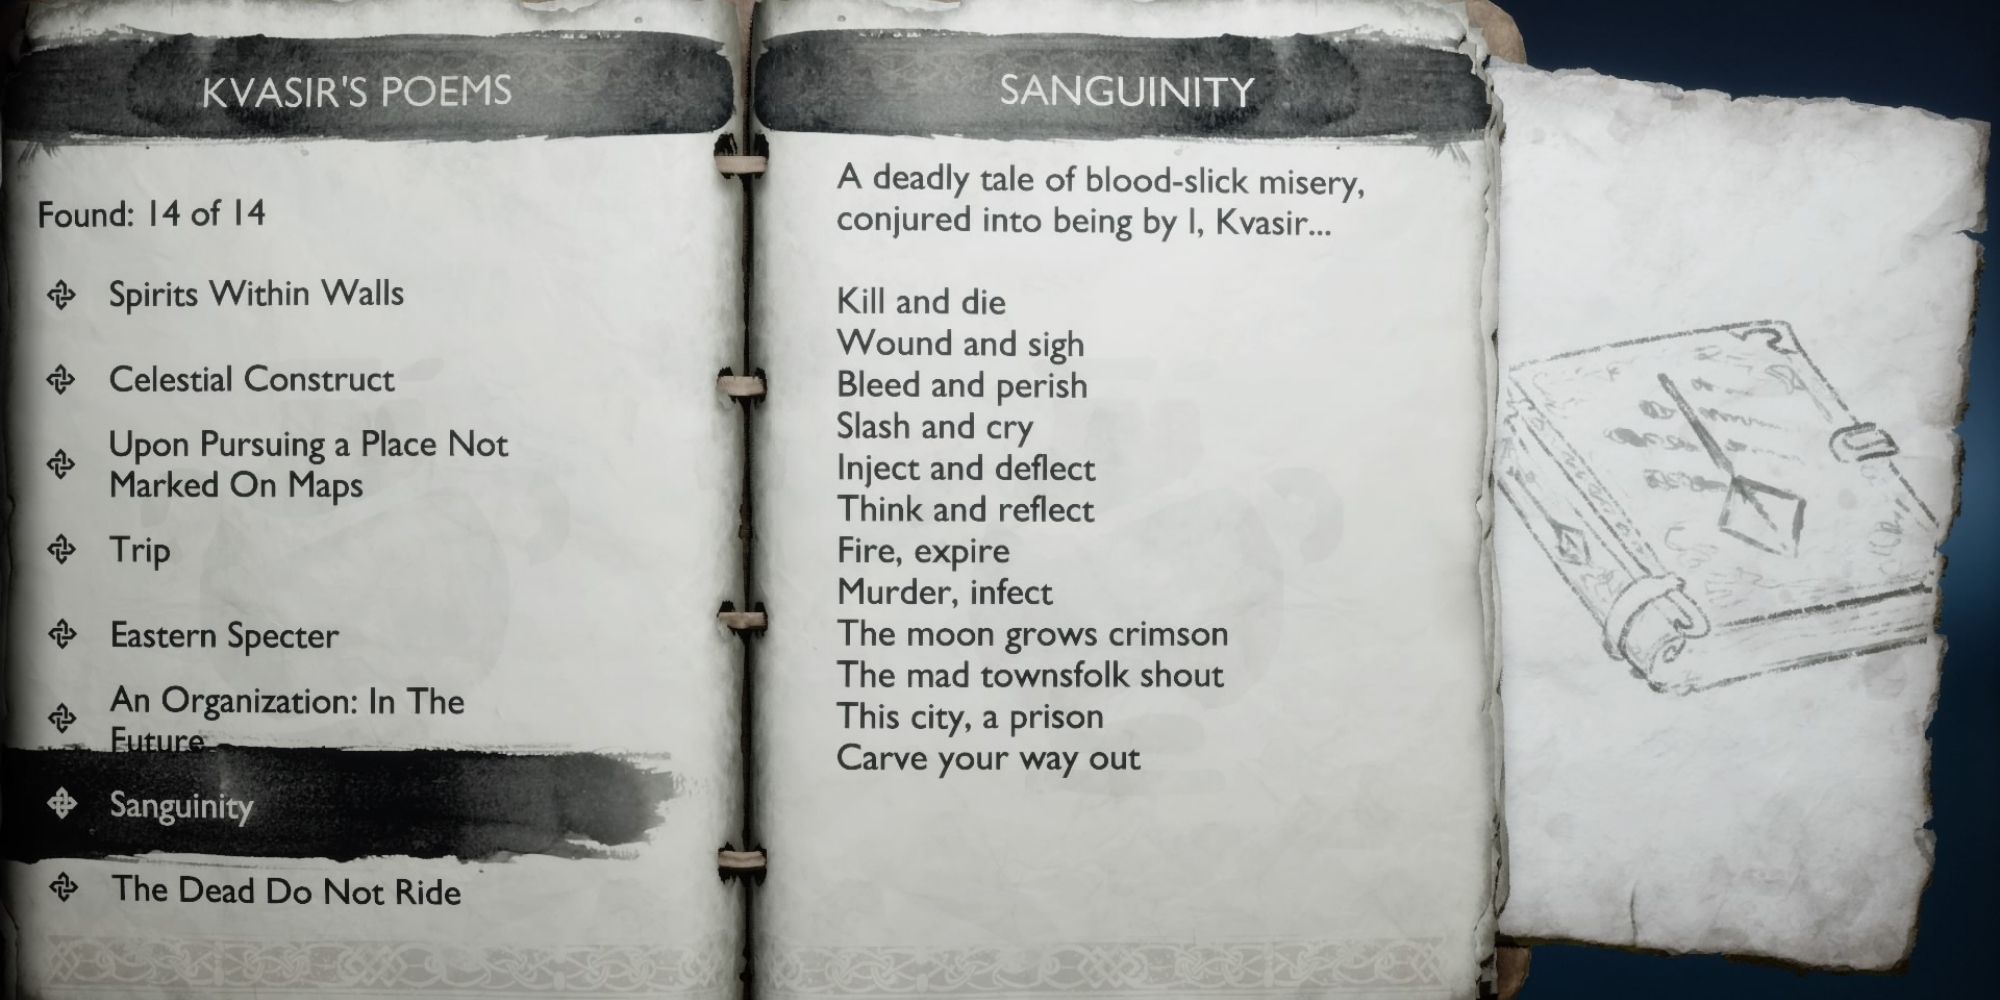 Krato's journal open to the page about Sanguinity